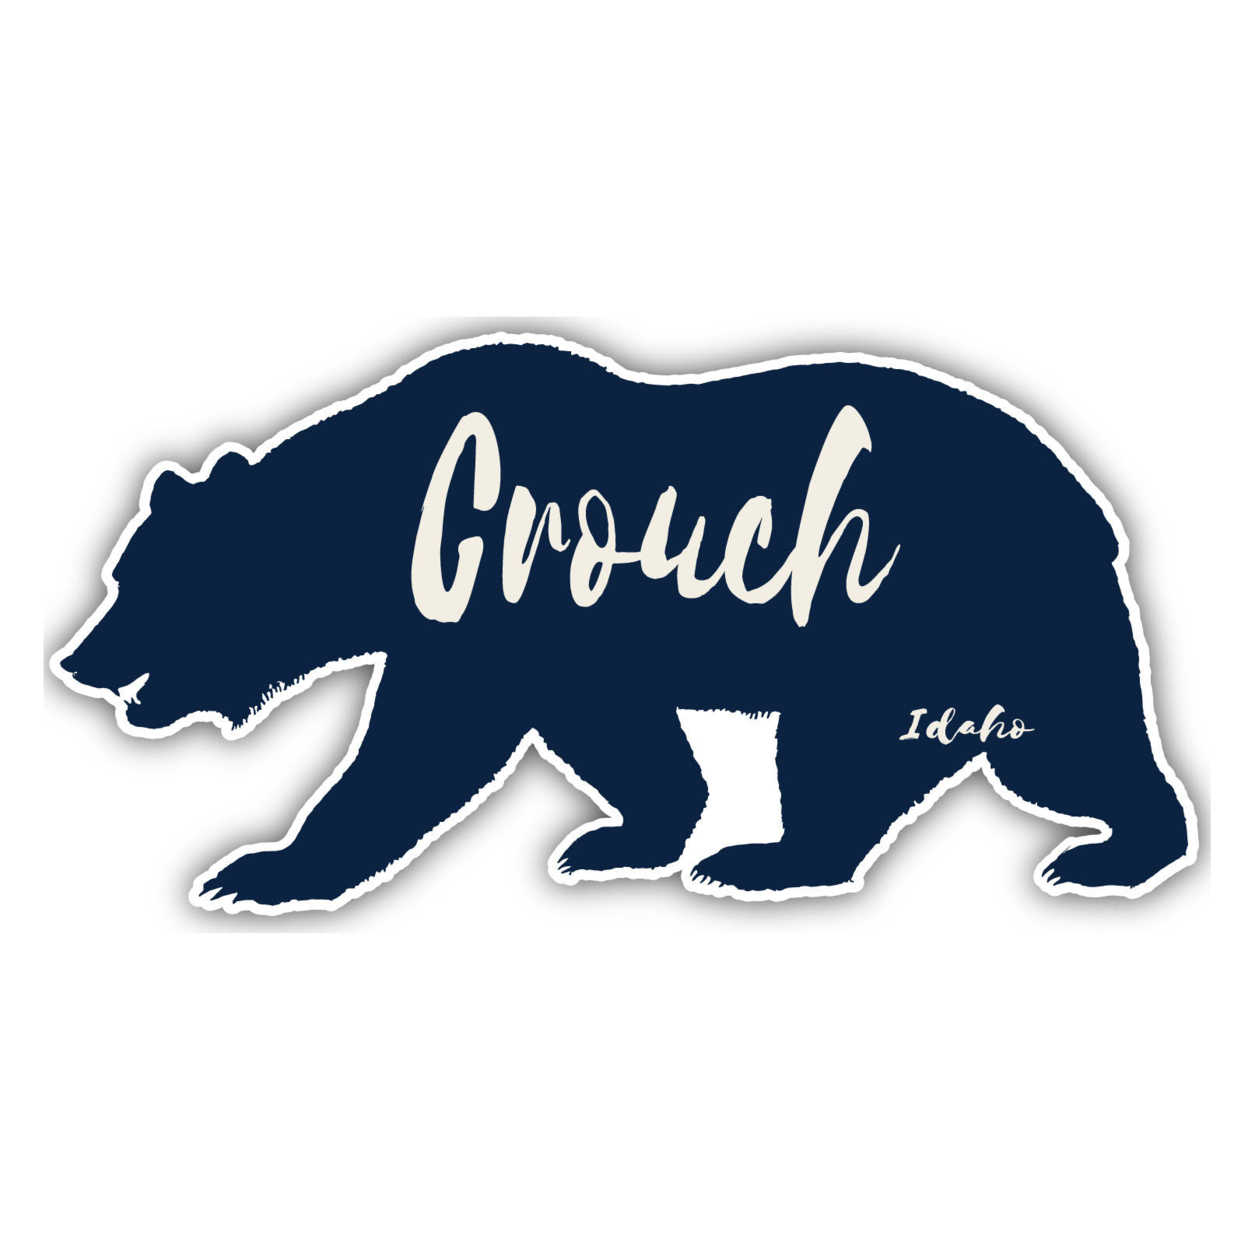 Crouch Idaho Souvenir Decorative Stickers (Choose Theme And Size) - 4-Pack, 12-Inch, Bear